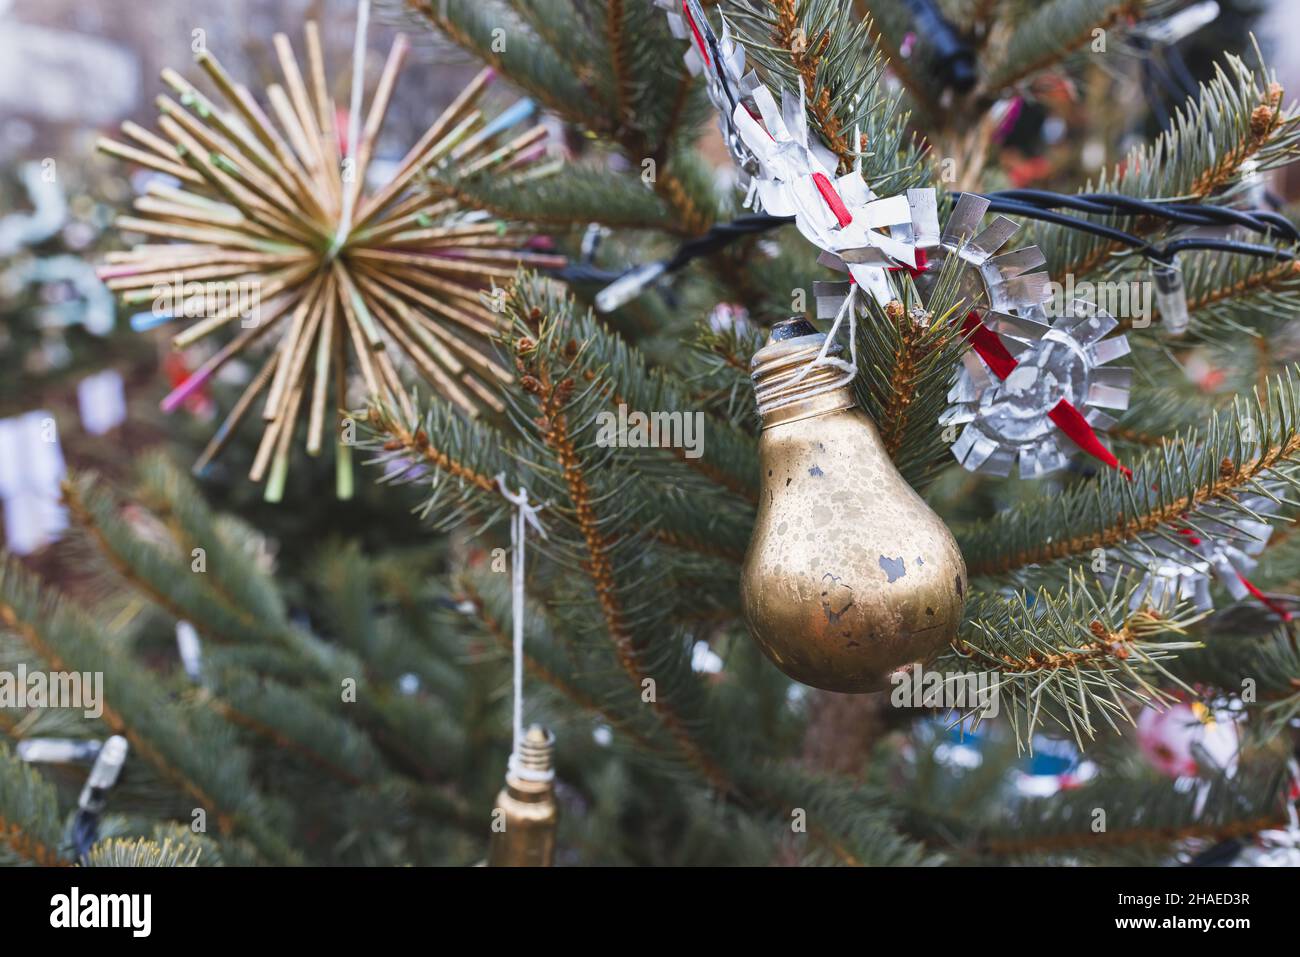 https://c8.alamy.com/comp/2HAED3R/painted-gold-old-light-bulb-and-handmade-aluminium-foil-decoration-on-christmas-tree-diy-creative-ideas-environment-recycle-reuse-upcycling-zero-waste-electricity-concept-selective-focus-2HAED3R.jpg